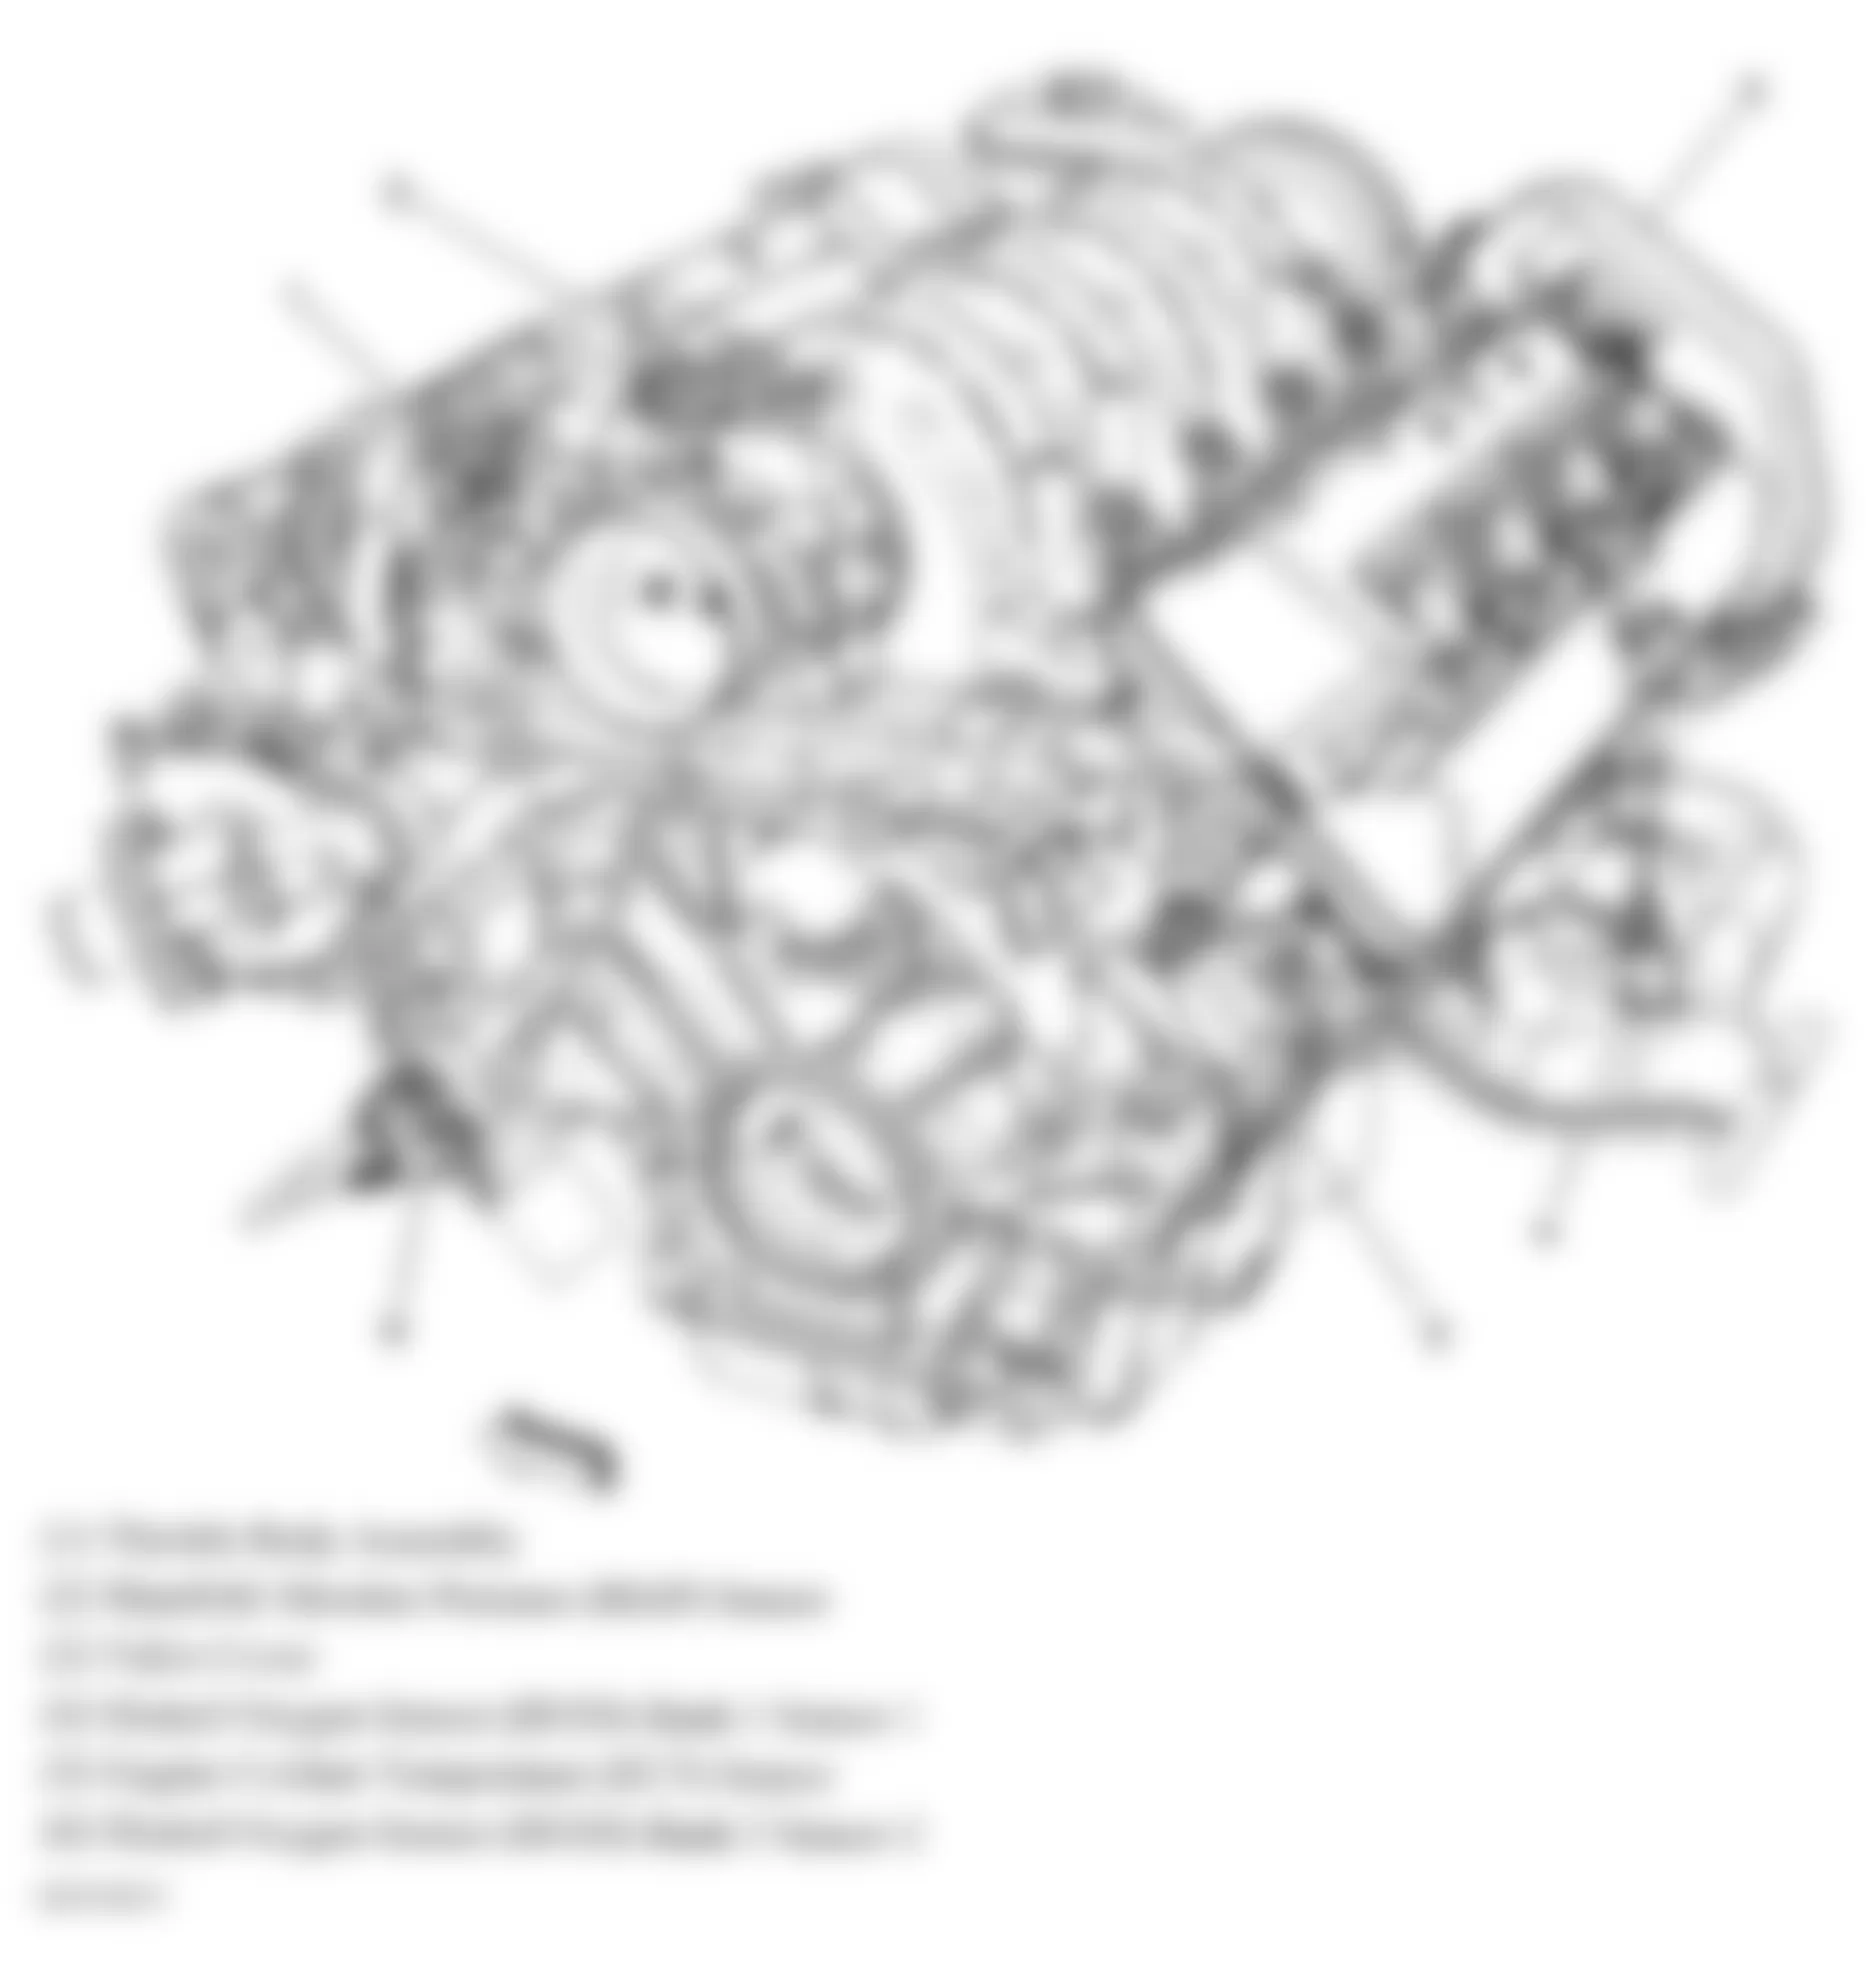 Buick Lucerne Super 2009 - Component Locations -  Rear Of Engine (4.6L)